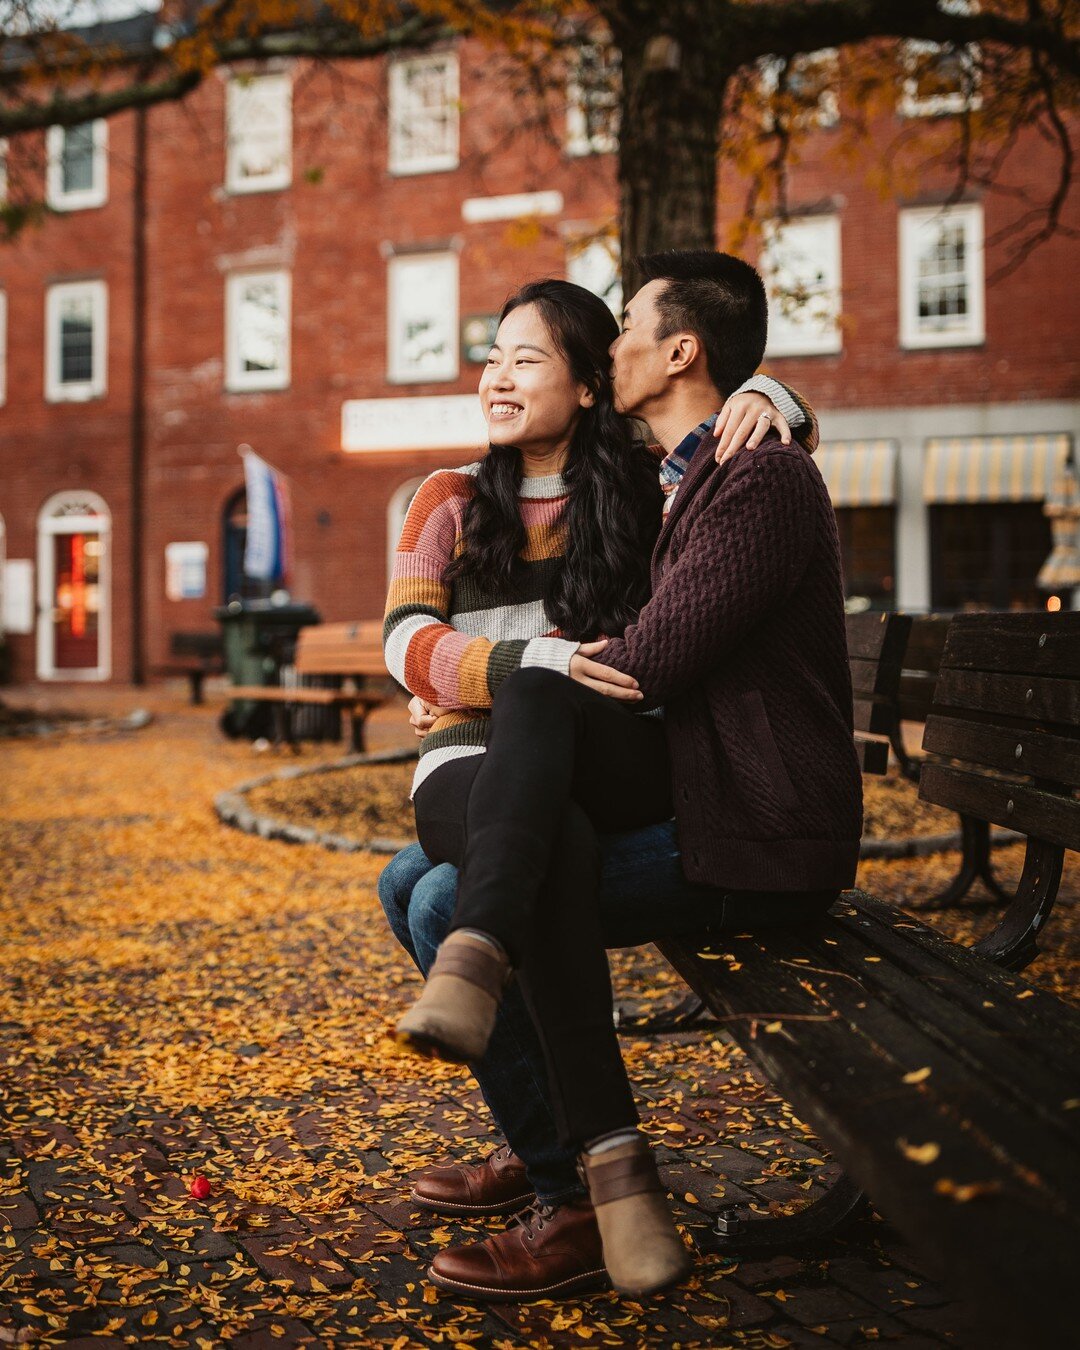 A historic seaport with vibrant Fall colors make such a great photo location. 

#newburyport #newburyportma #newburyportmass #newburyportmassachusetts #newburyportphotographer #newburyportengagement #newburyportengagementphotographer #newburyportenga